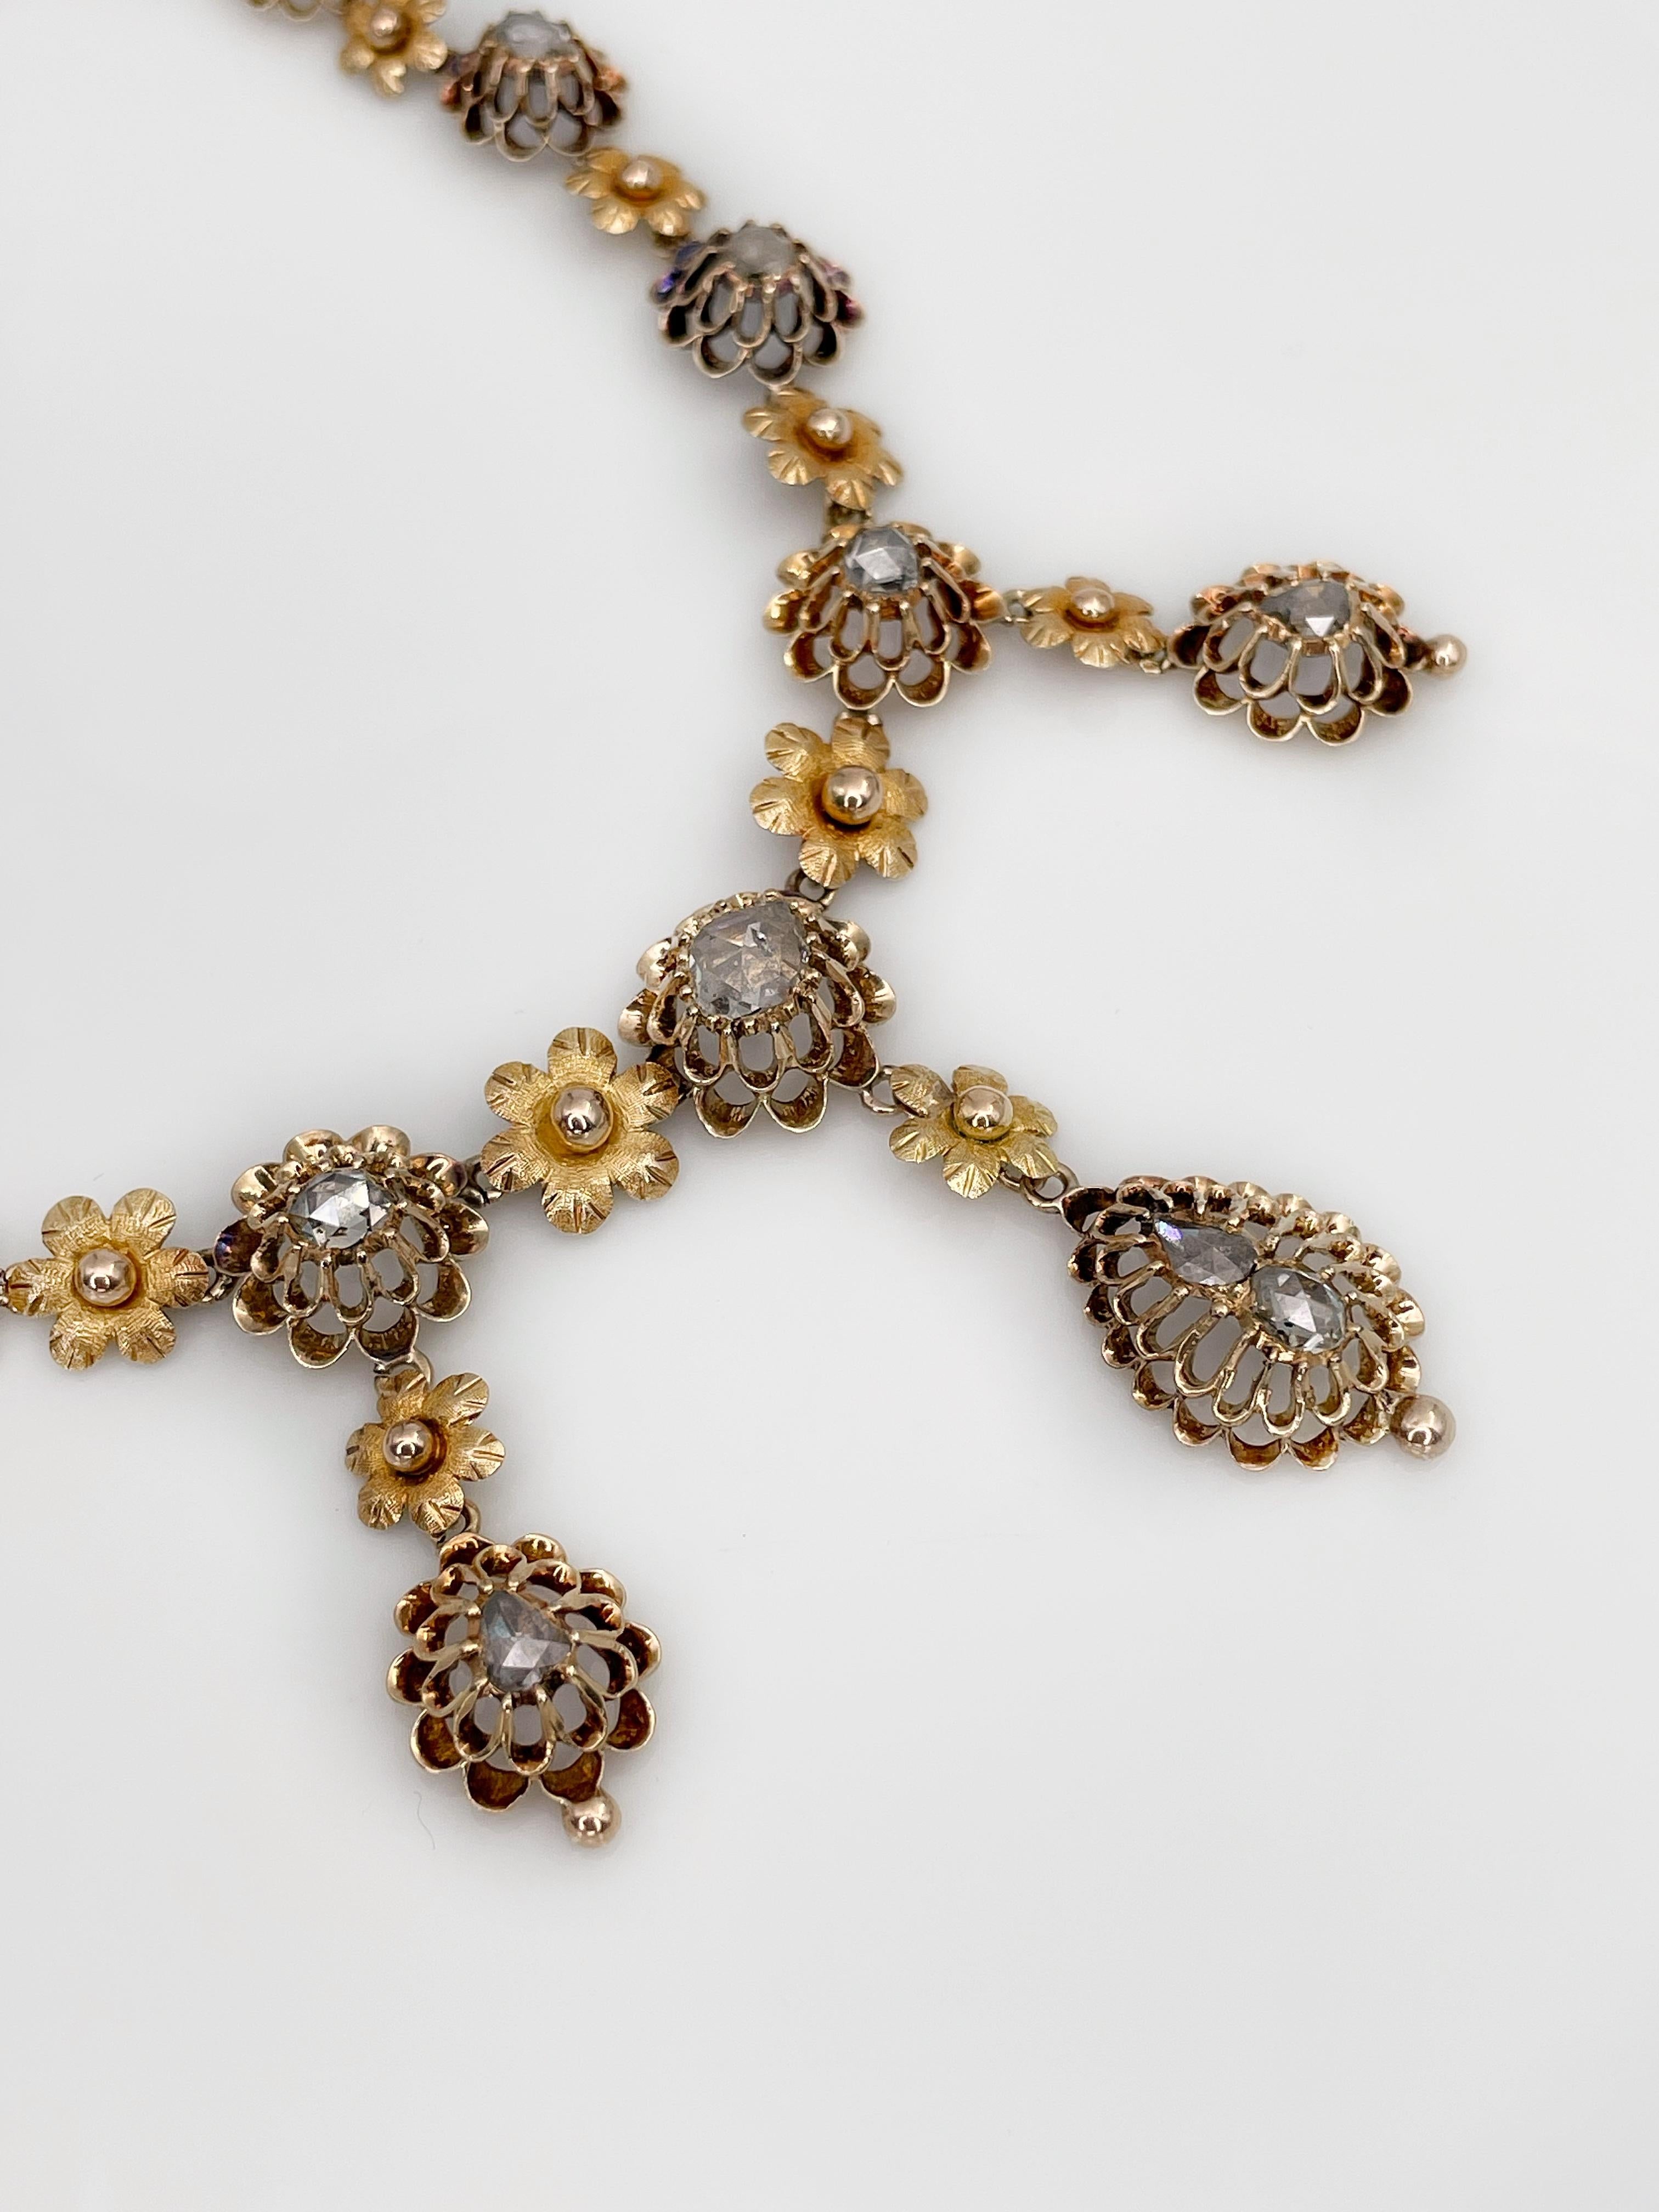 Women's or Men's Antique Victorian 15K Yellow Gold and Rose Cut Diamonds Floral Necklace